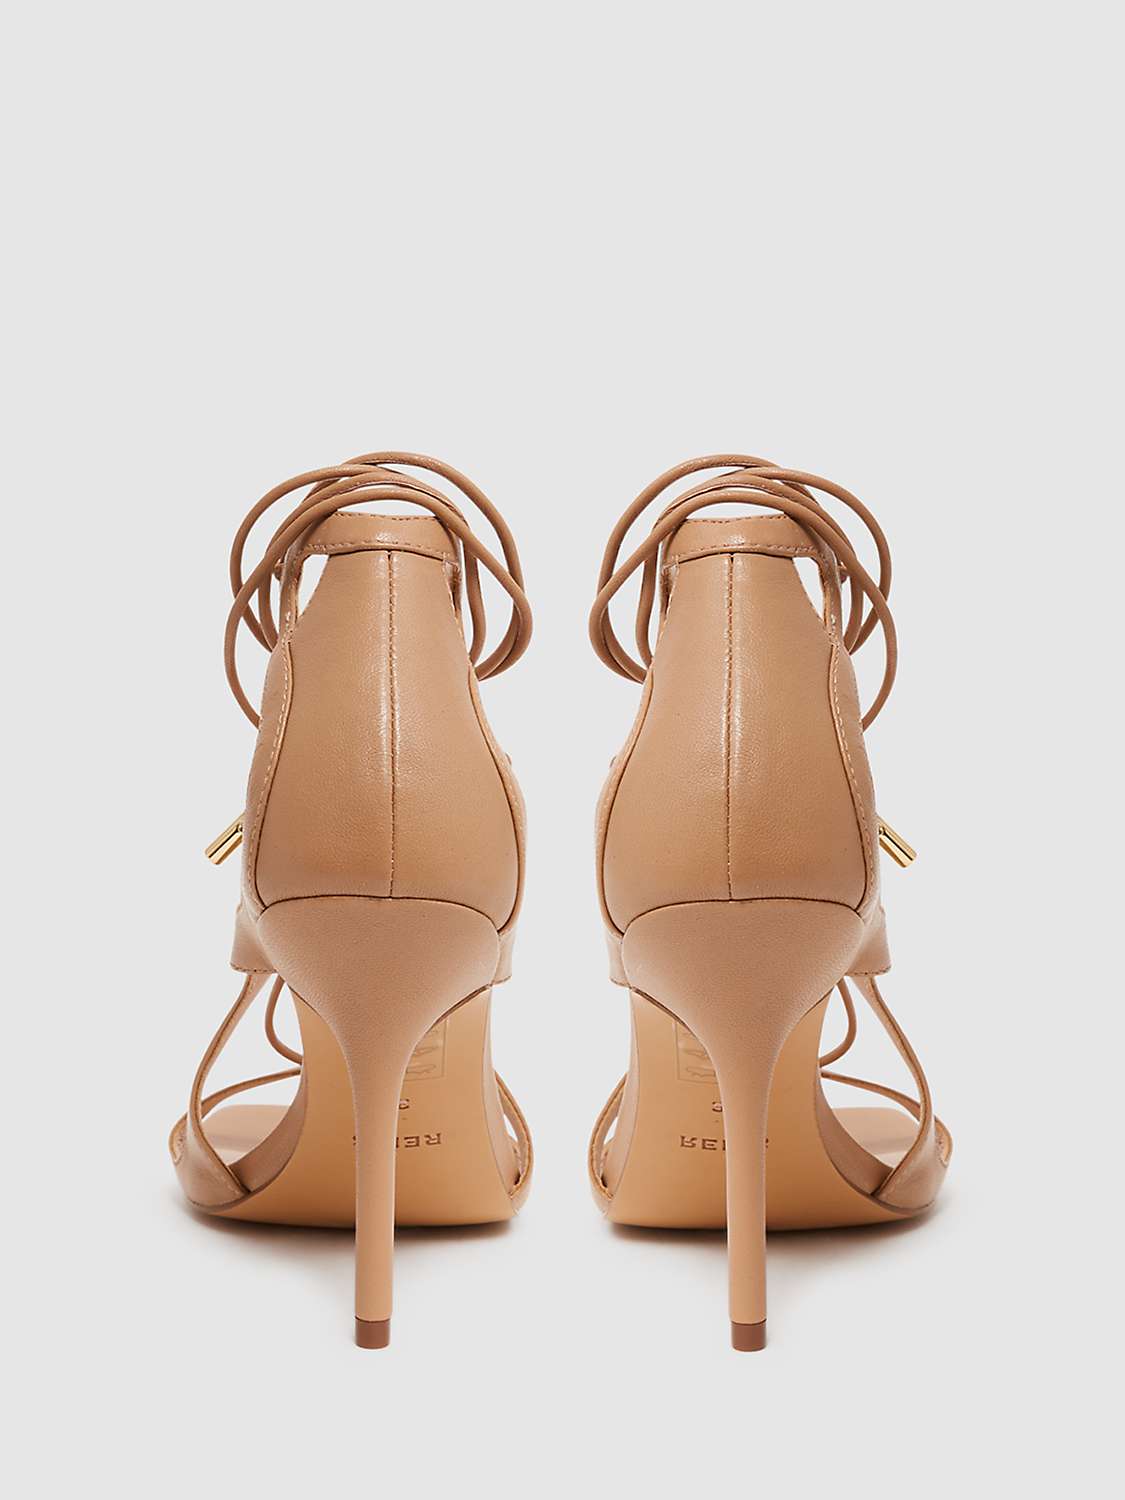 Buy Reiss Kate Cross Strap High Heel Leather Sandals, Biscuit Online at johnlewis.com